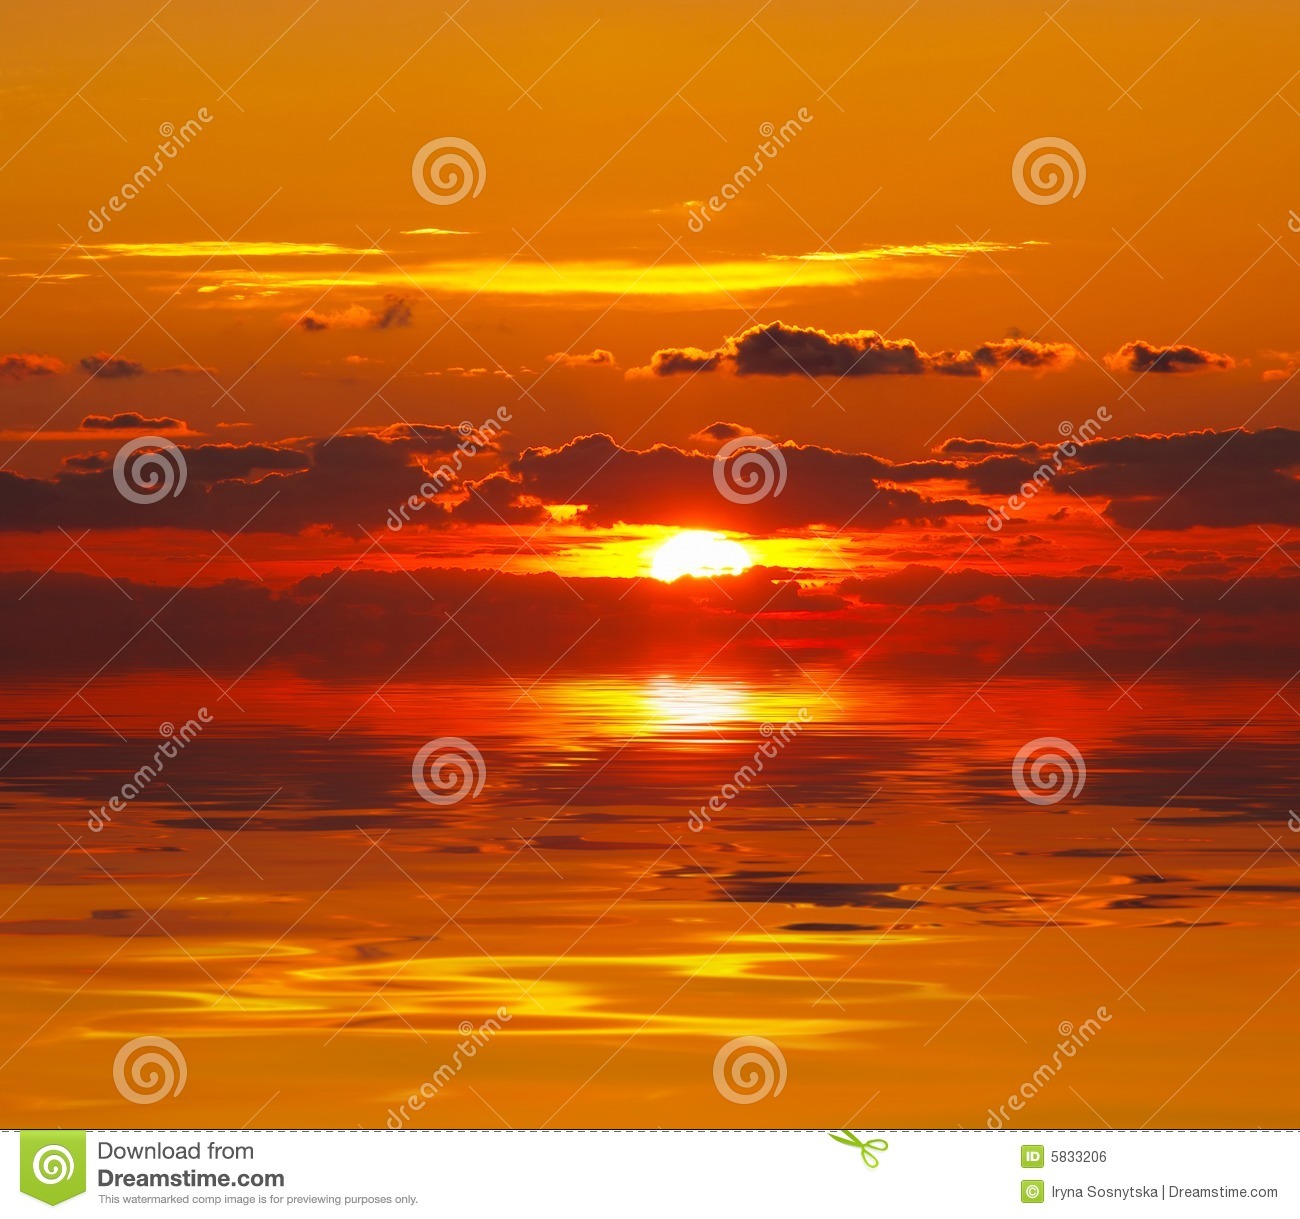 Sunset Over Water Royalty Free Stock Image   Image  5833206